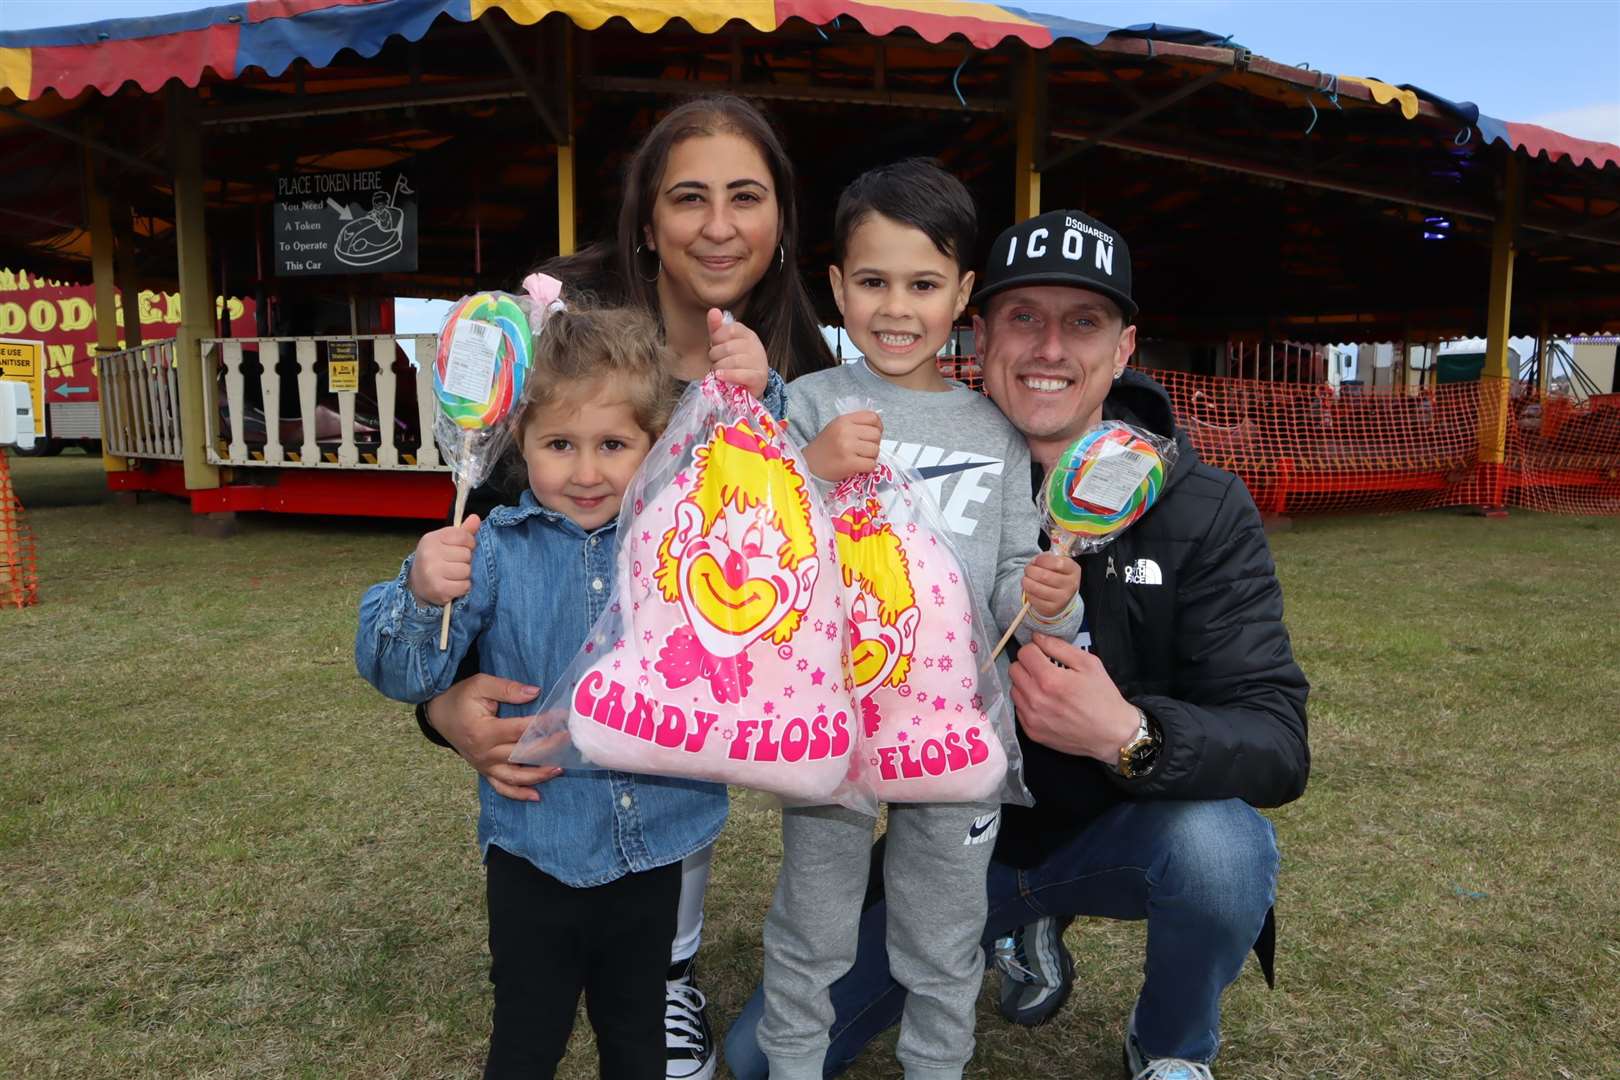 Everyone ended up with free candyfloss at Smith's funfair, Barton's Point, Sheerness. Here youngsters Elizabeth, 3, and Olly, 5, tuck into their treat with mum Elmaz Mehmet and dad Billy McPhail